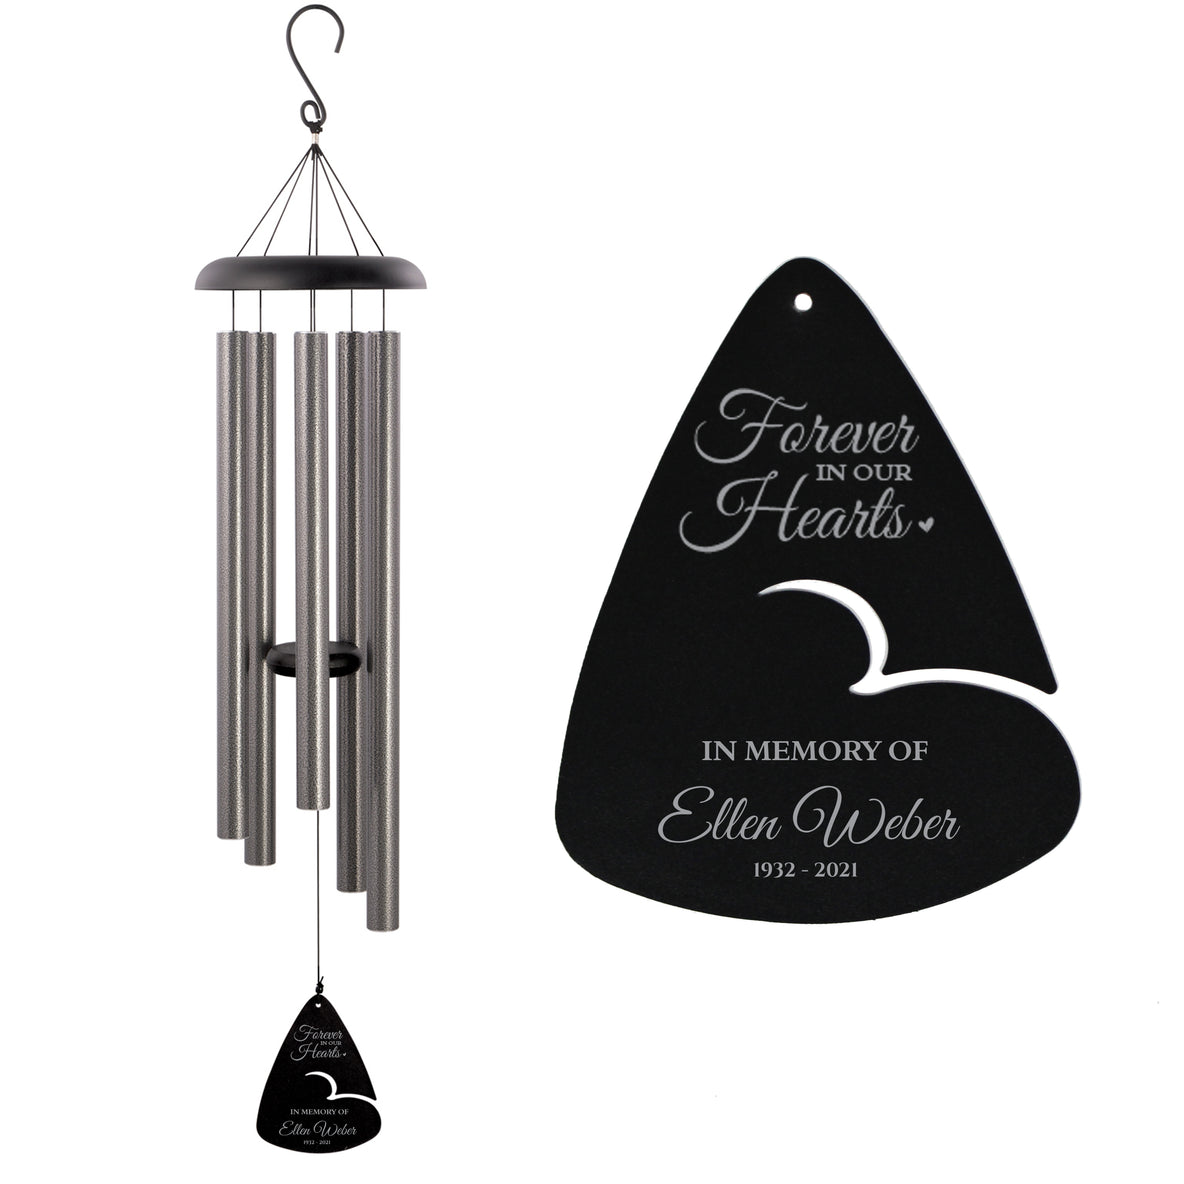 Foreever in our hearts Personalized Memorial Wind Chime